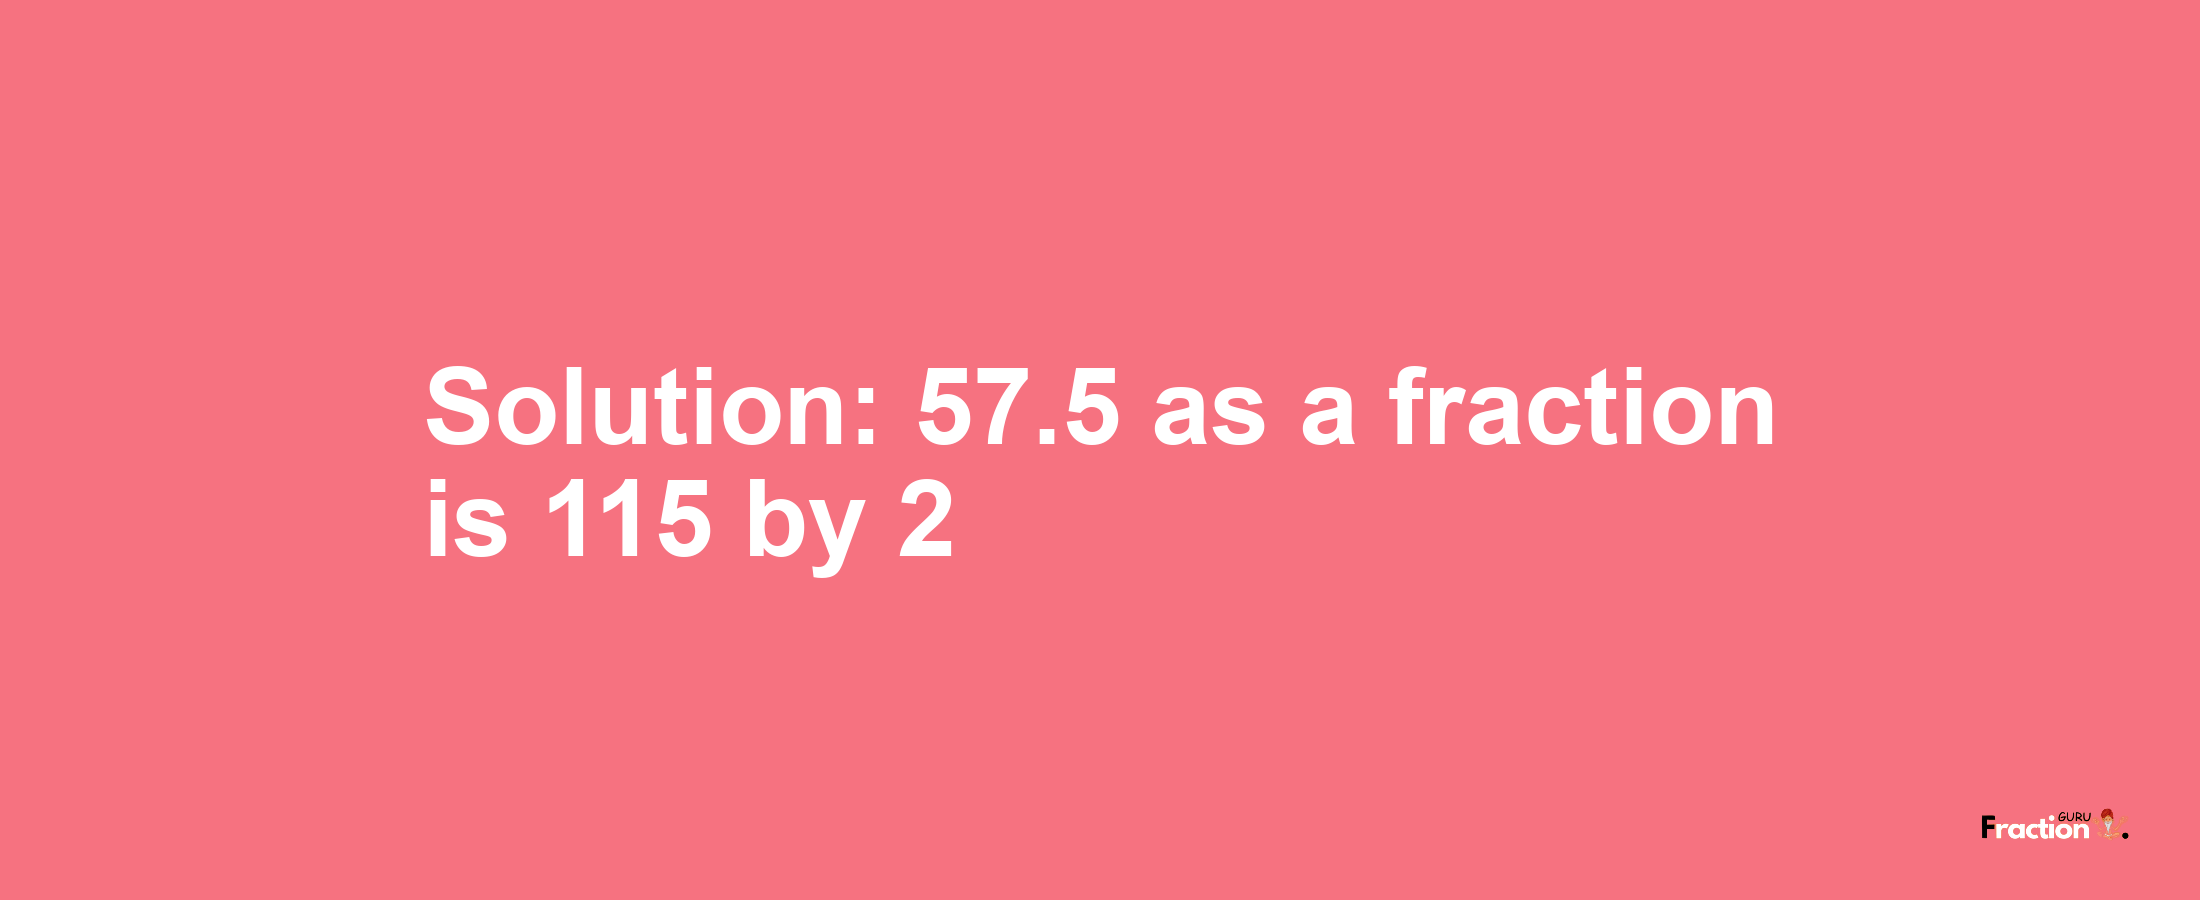 Solution:57.5 as a fraction is 115/2